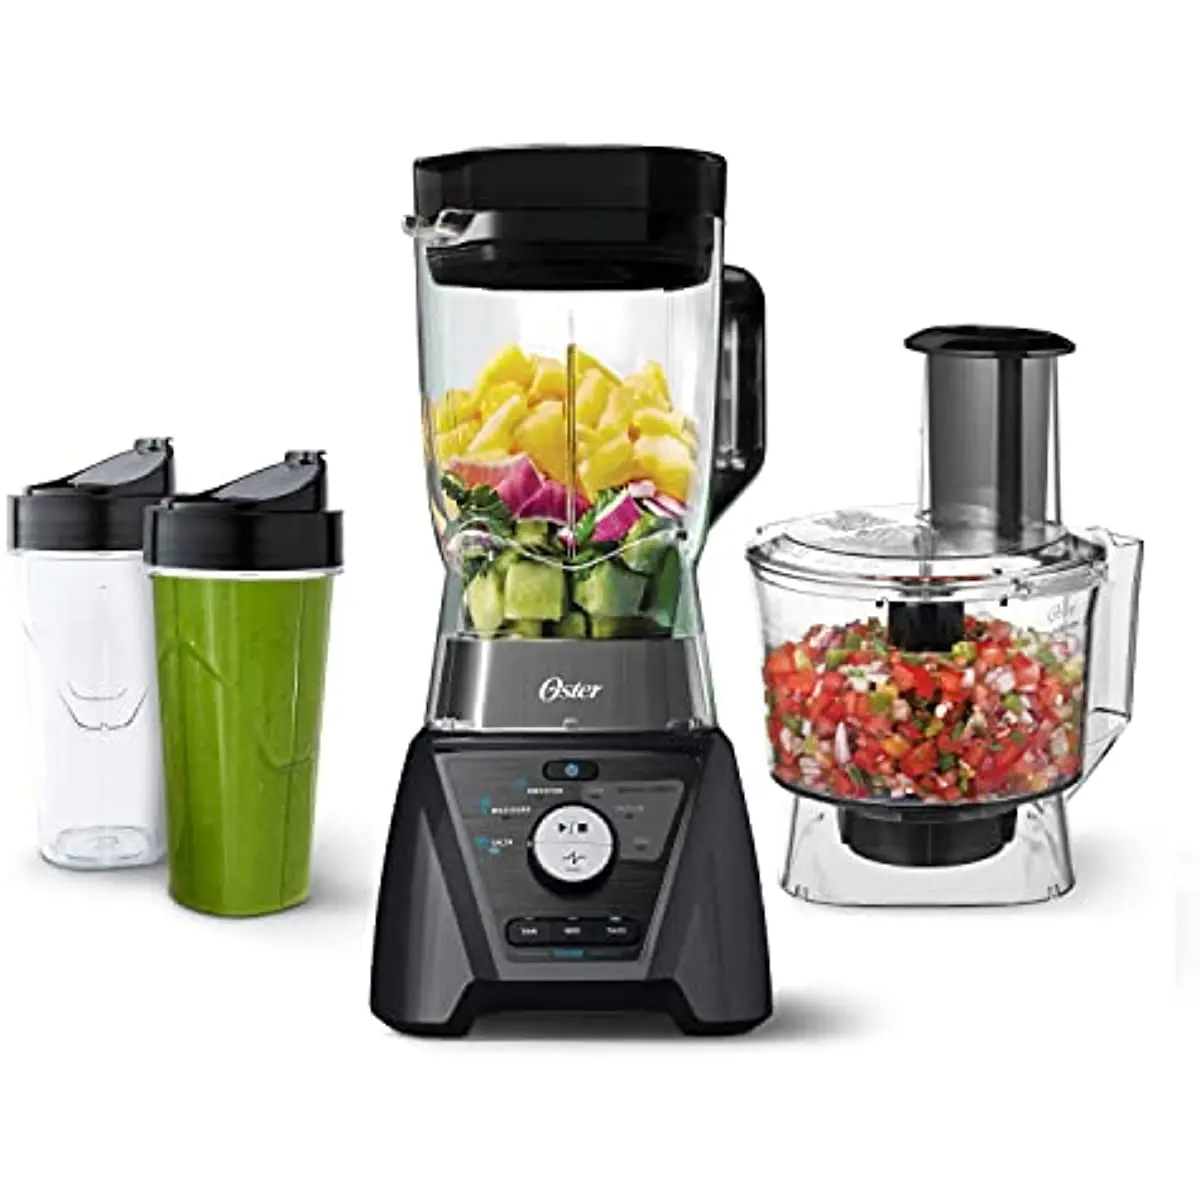 

Oster Blender and Food Processor Combo with 3 Settings for Smoothies,Food Chopping,Includes 2 24-Ounce Cups and Lids,Carbon Grey